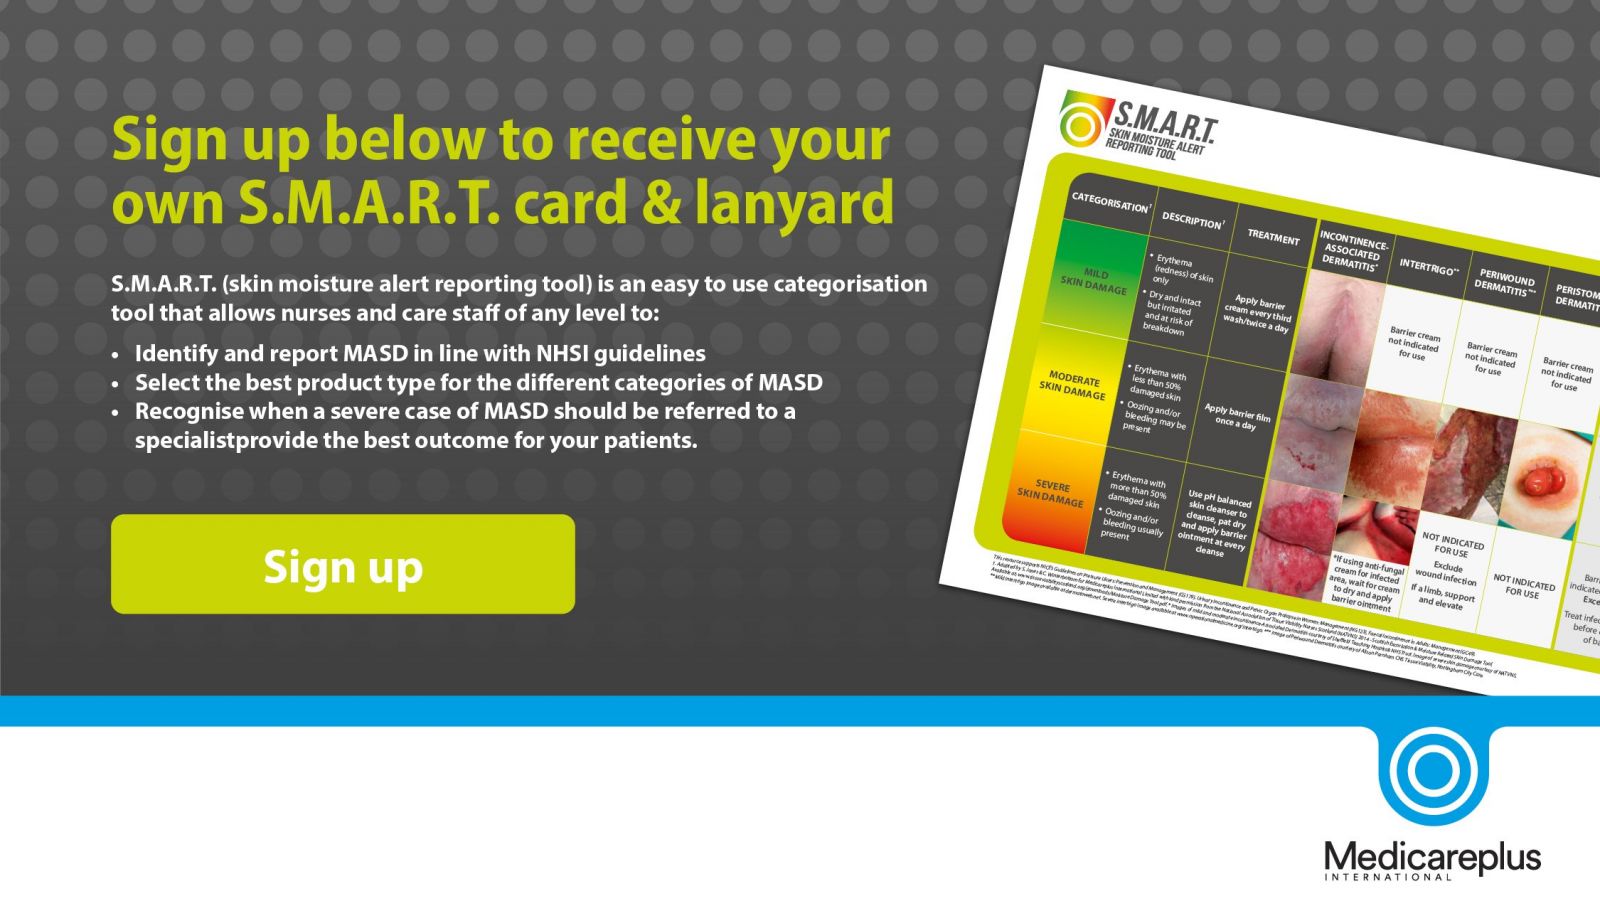 Sign up to receive your own SMART card & Lanyard